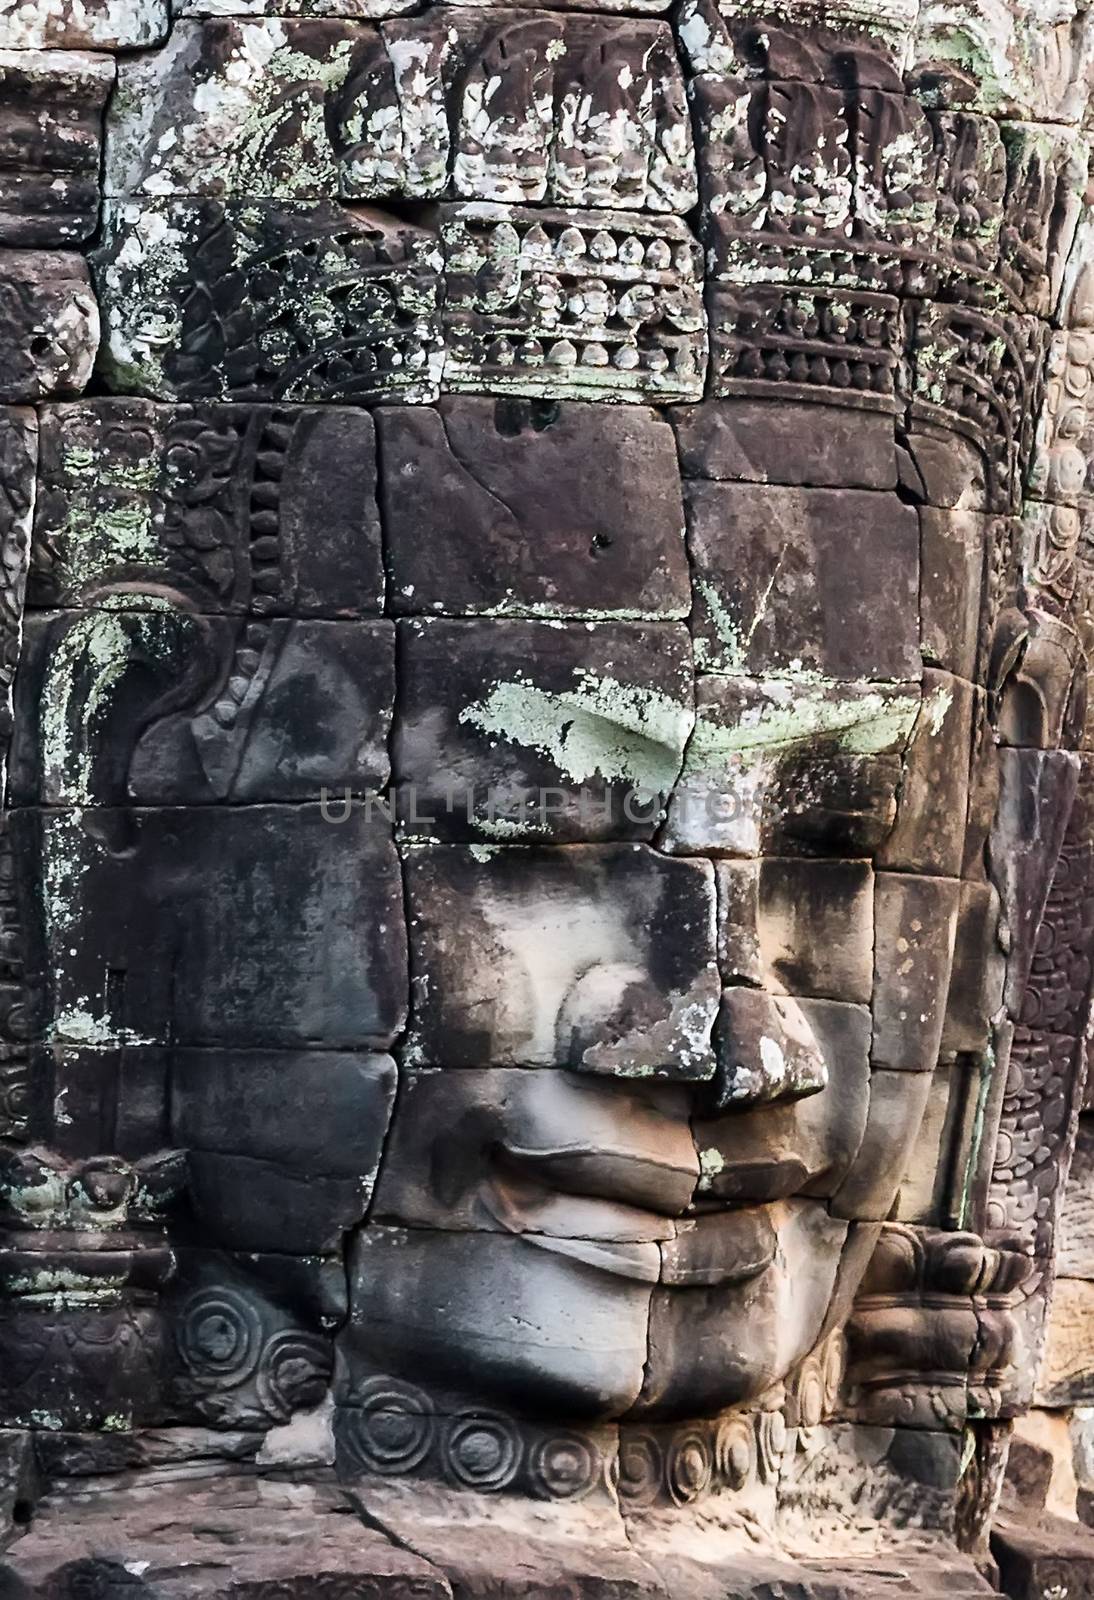 Ancient stone faces of king Bayon Temple Angkor Thom, Cambodia. Ancient monument Khmer architecture Kampuchea.